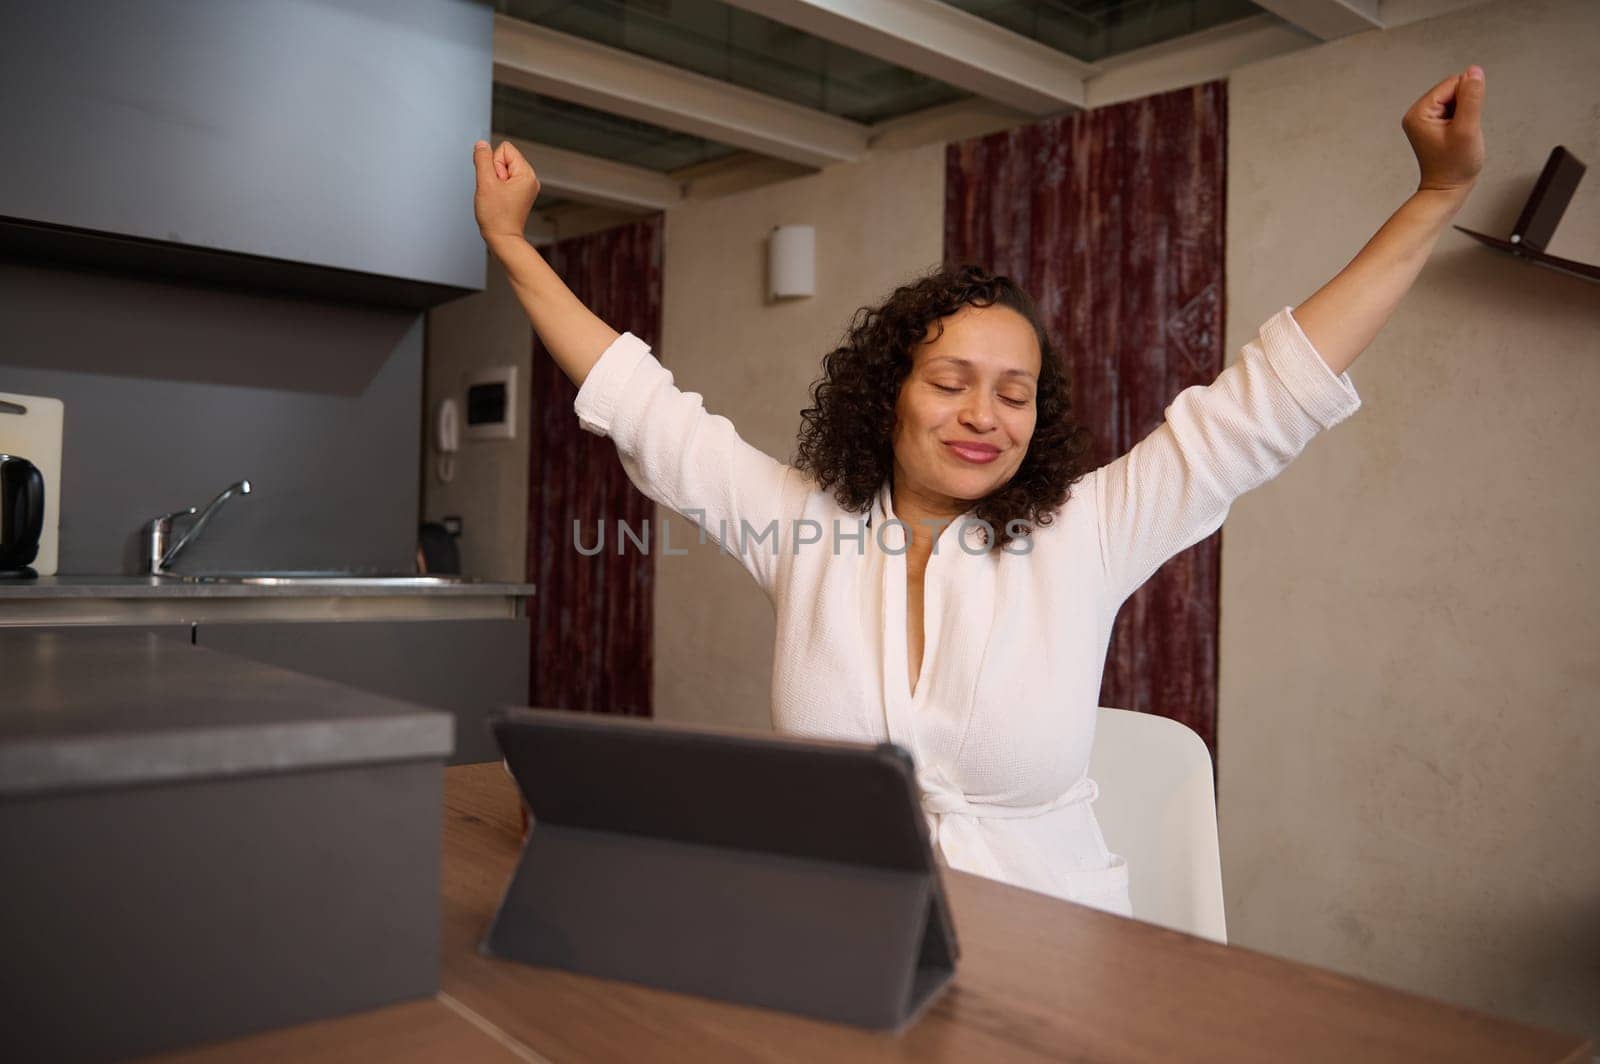 Attractive young woman smiling stretching up after waking up in the morning, sitting at table with a digital tablet. People. Morning routine. Lifestyle. Online communication and business. Remote job by artgf